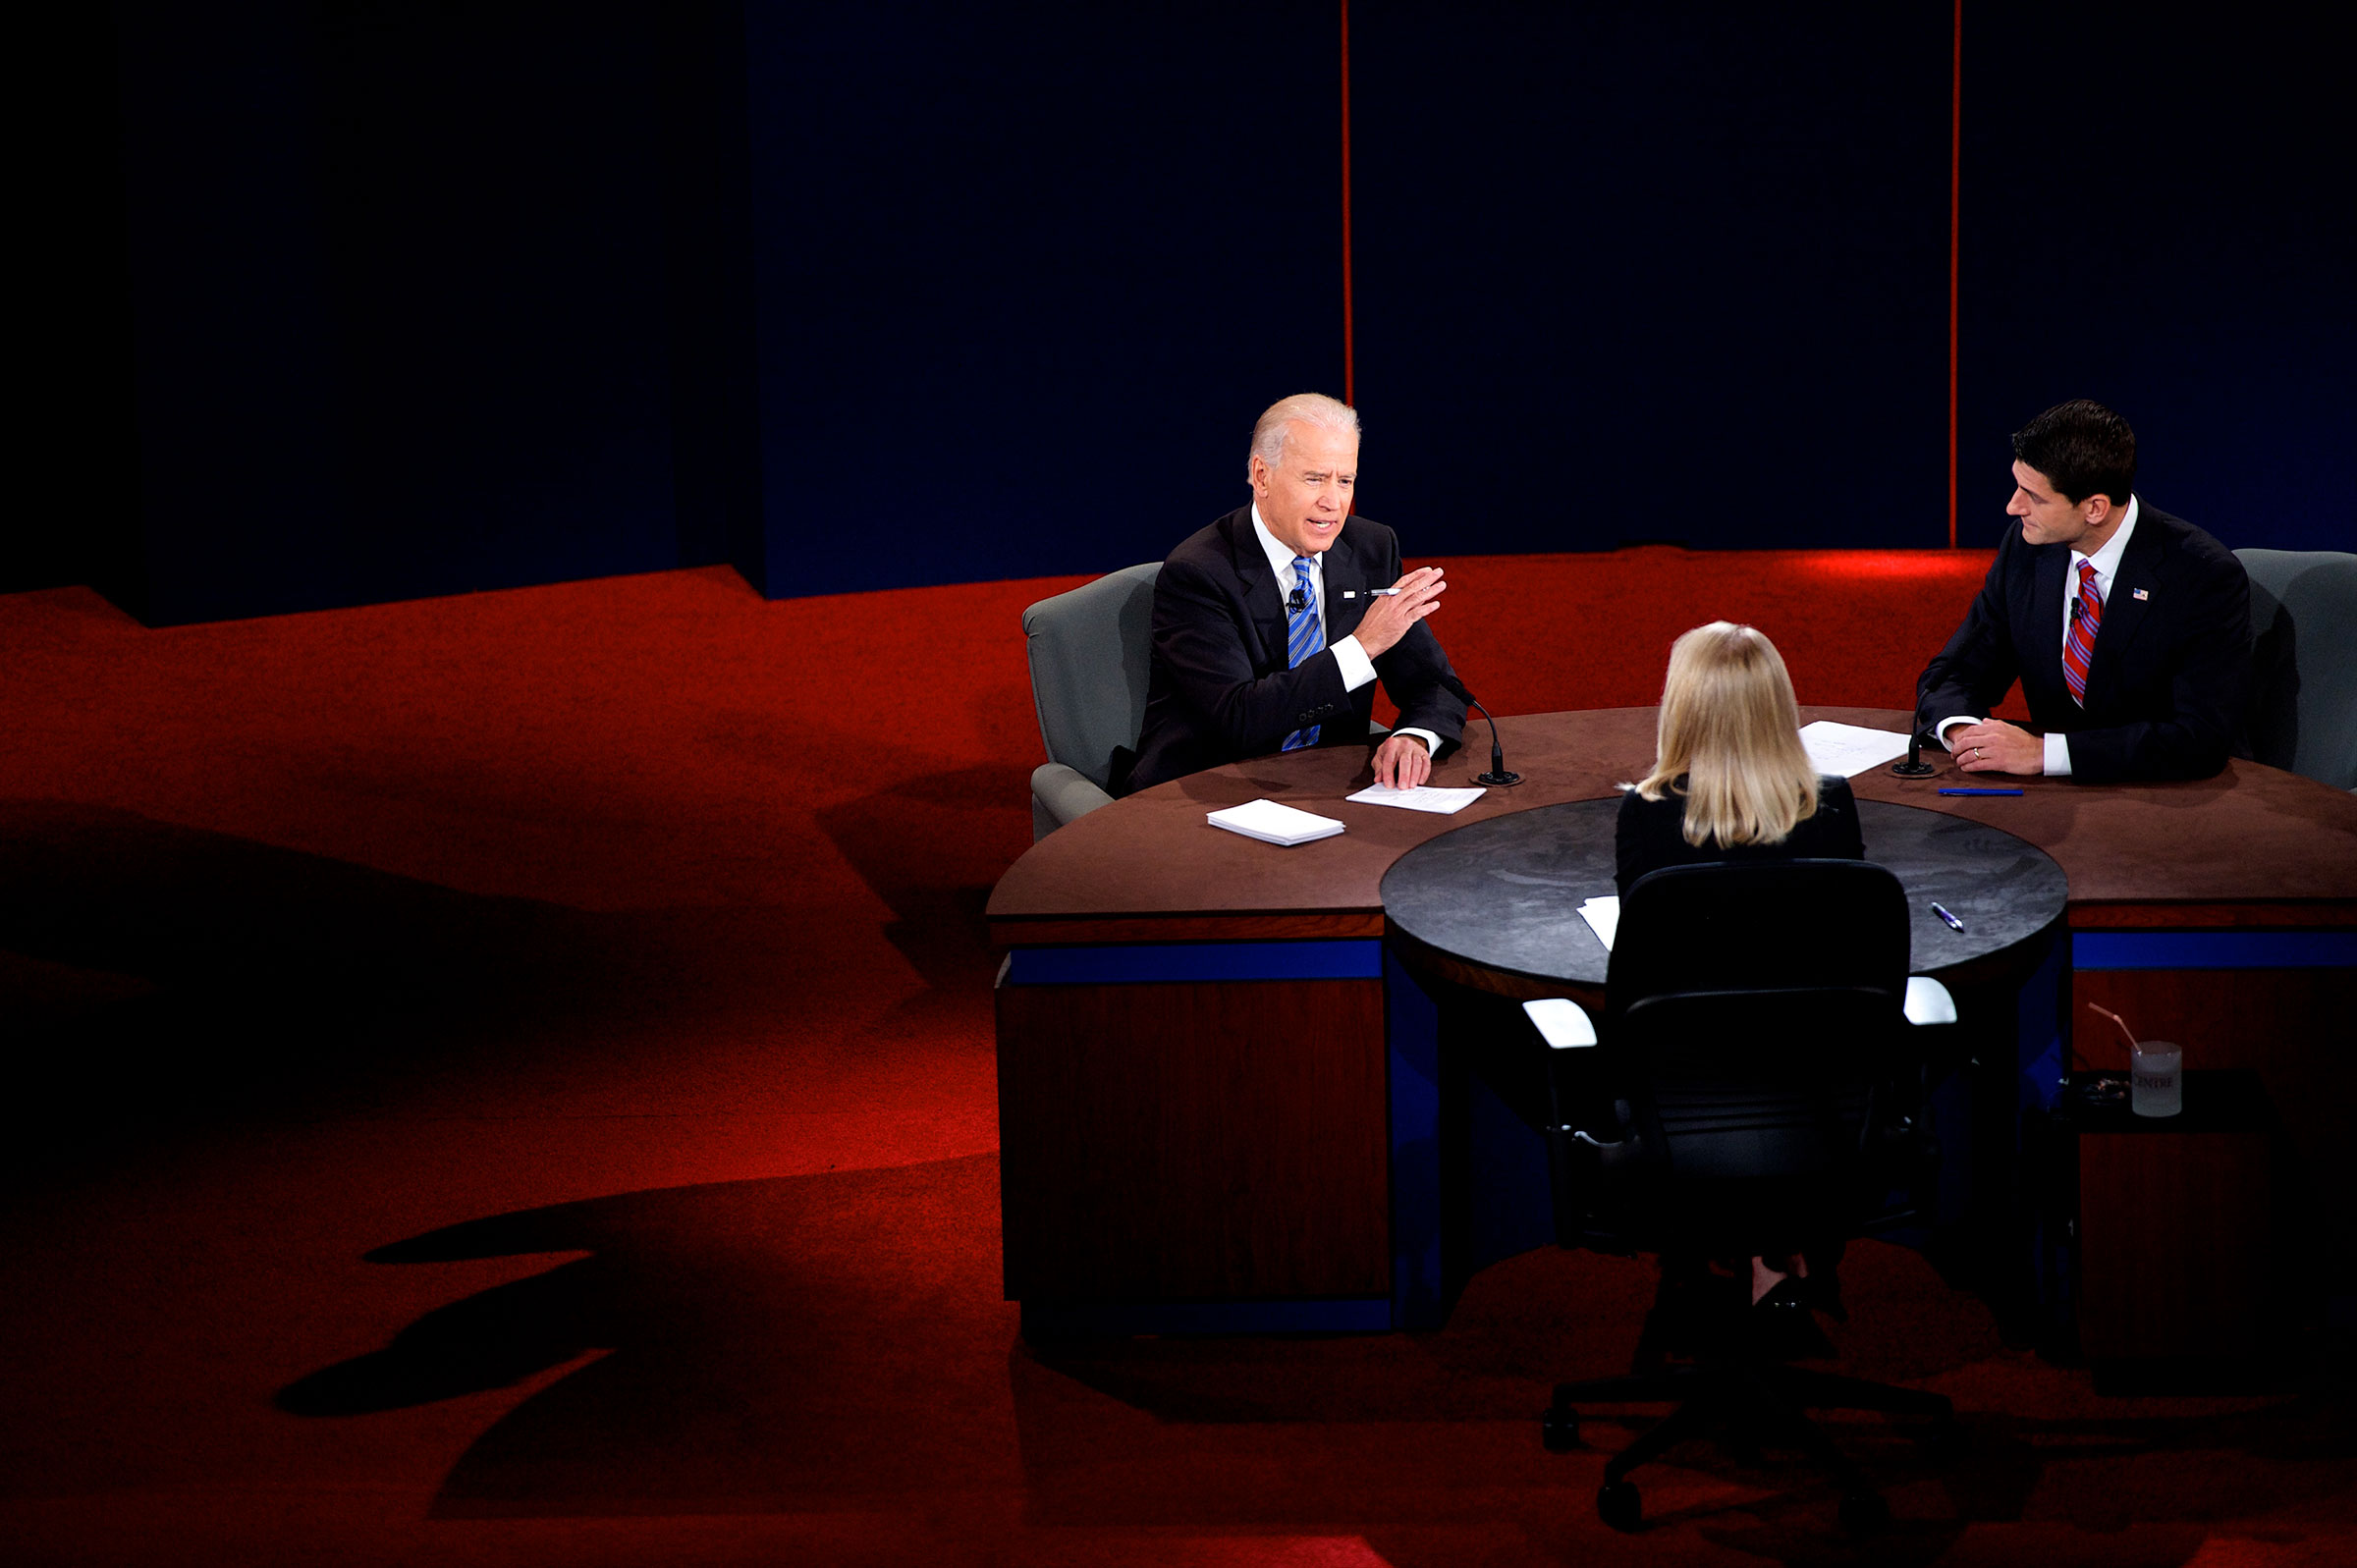 Then Vice President Joe Biden and Paul Ryan participate in the Vice Presidential Debate at Centre College, with Moderator ABC News Anchor Martha Raddatz, in Danville, Ky. on Oct. 11, 2012. (Mark Makela—Corbis/Getty Images)